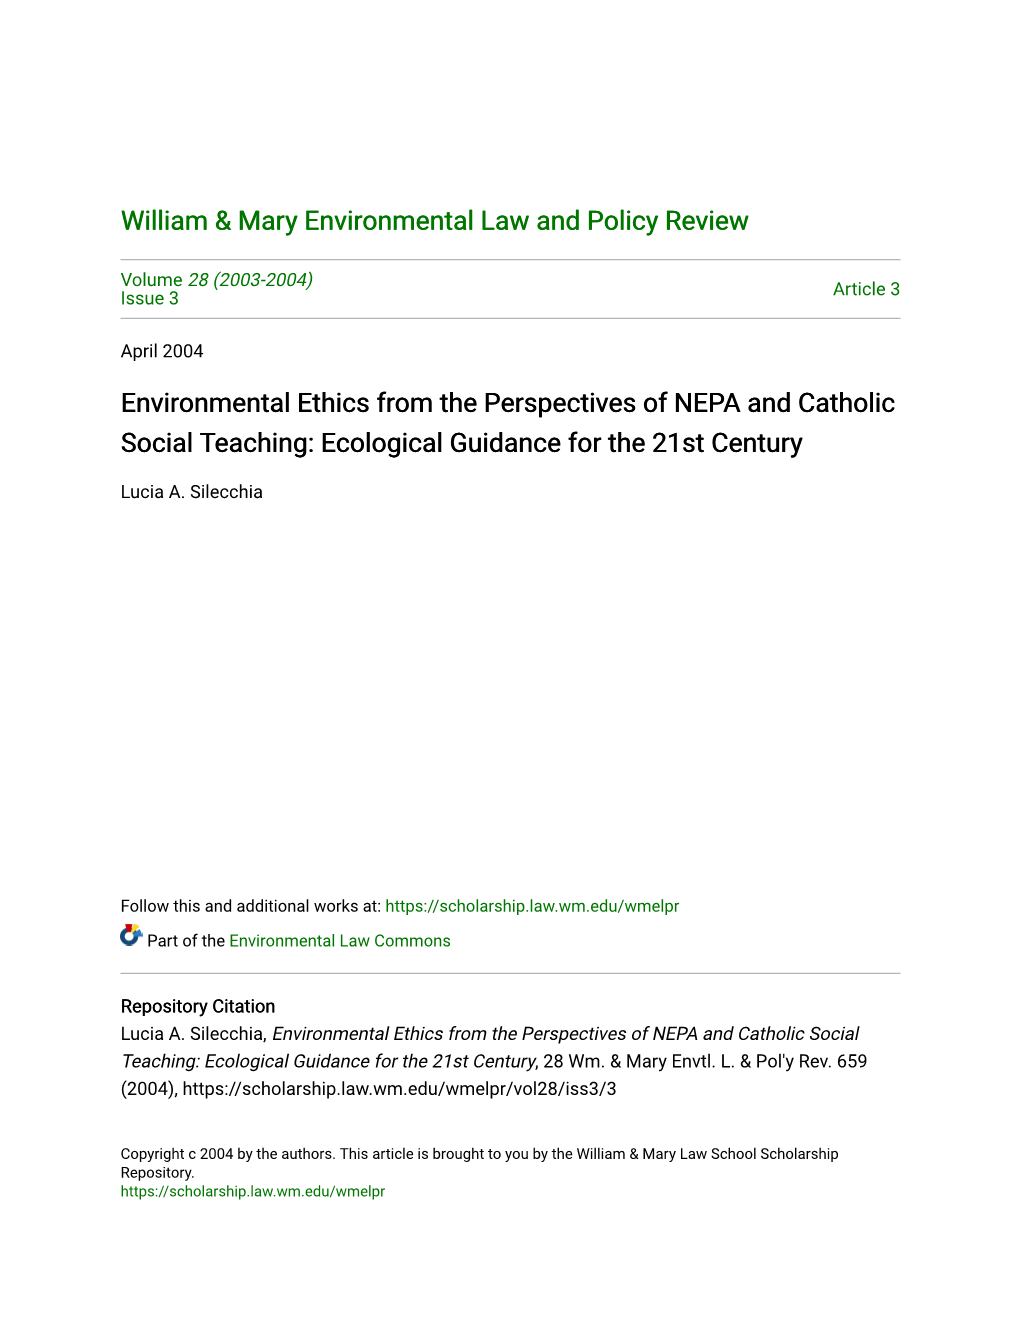 Environmental Ethics from the Perspectives of NEPA and Catholic Social Teaching: Ecological Guidance for the 21St Century